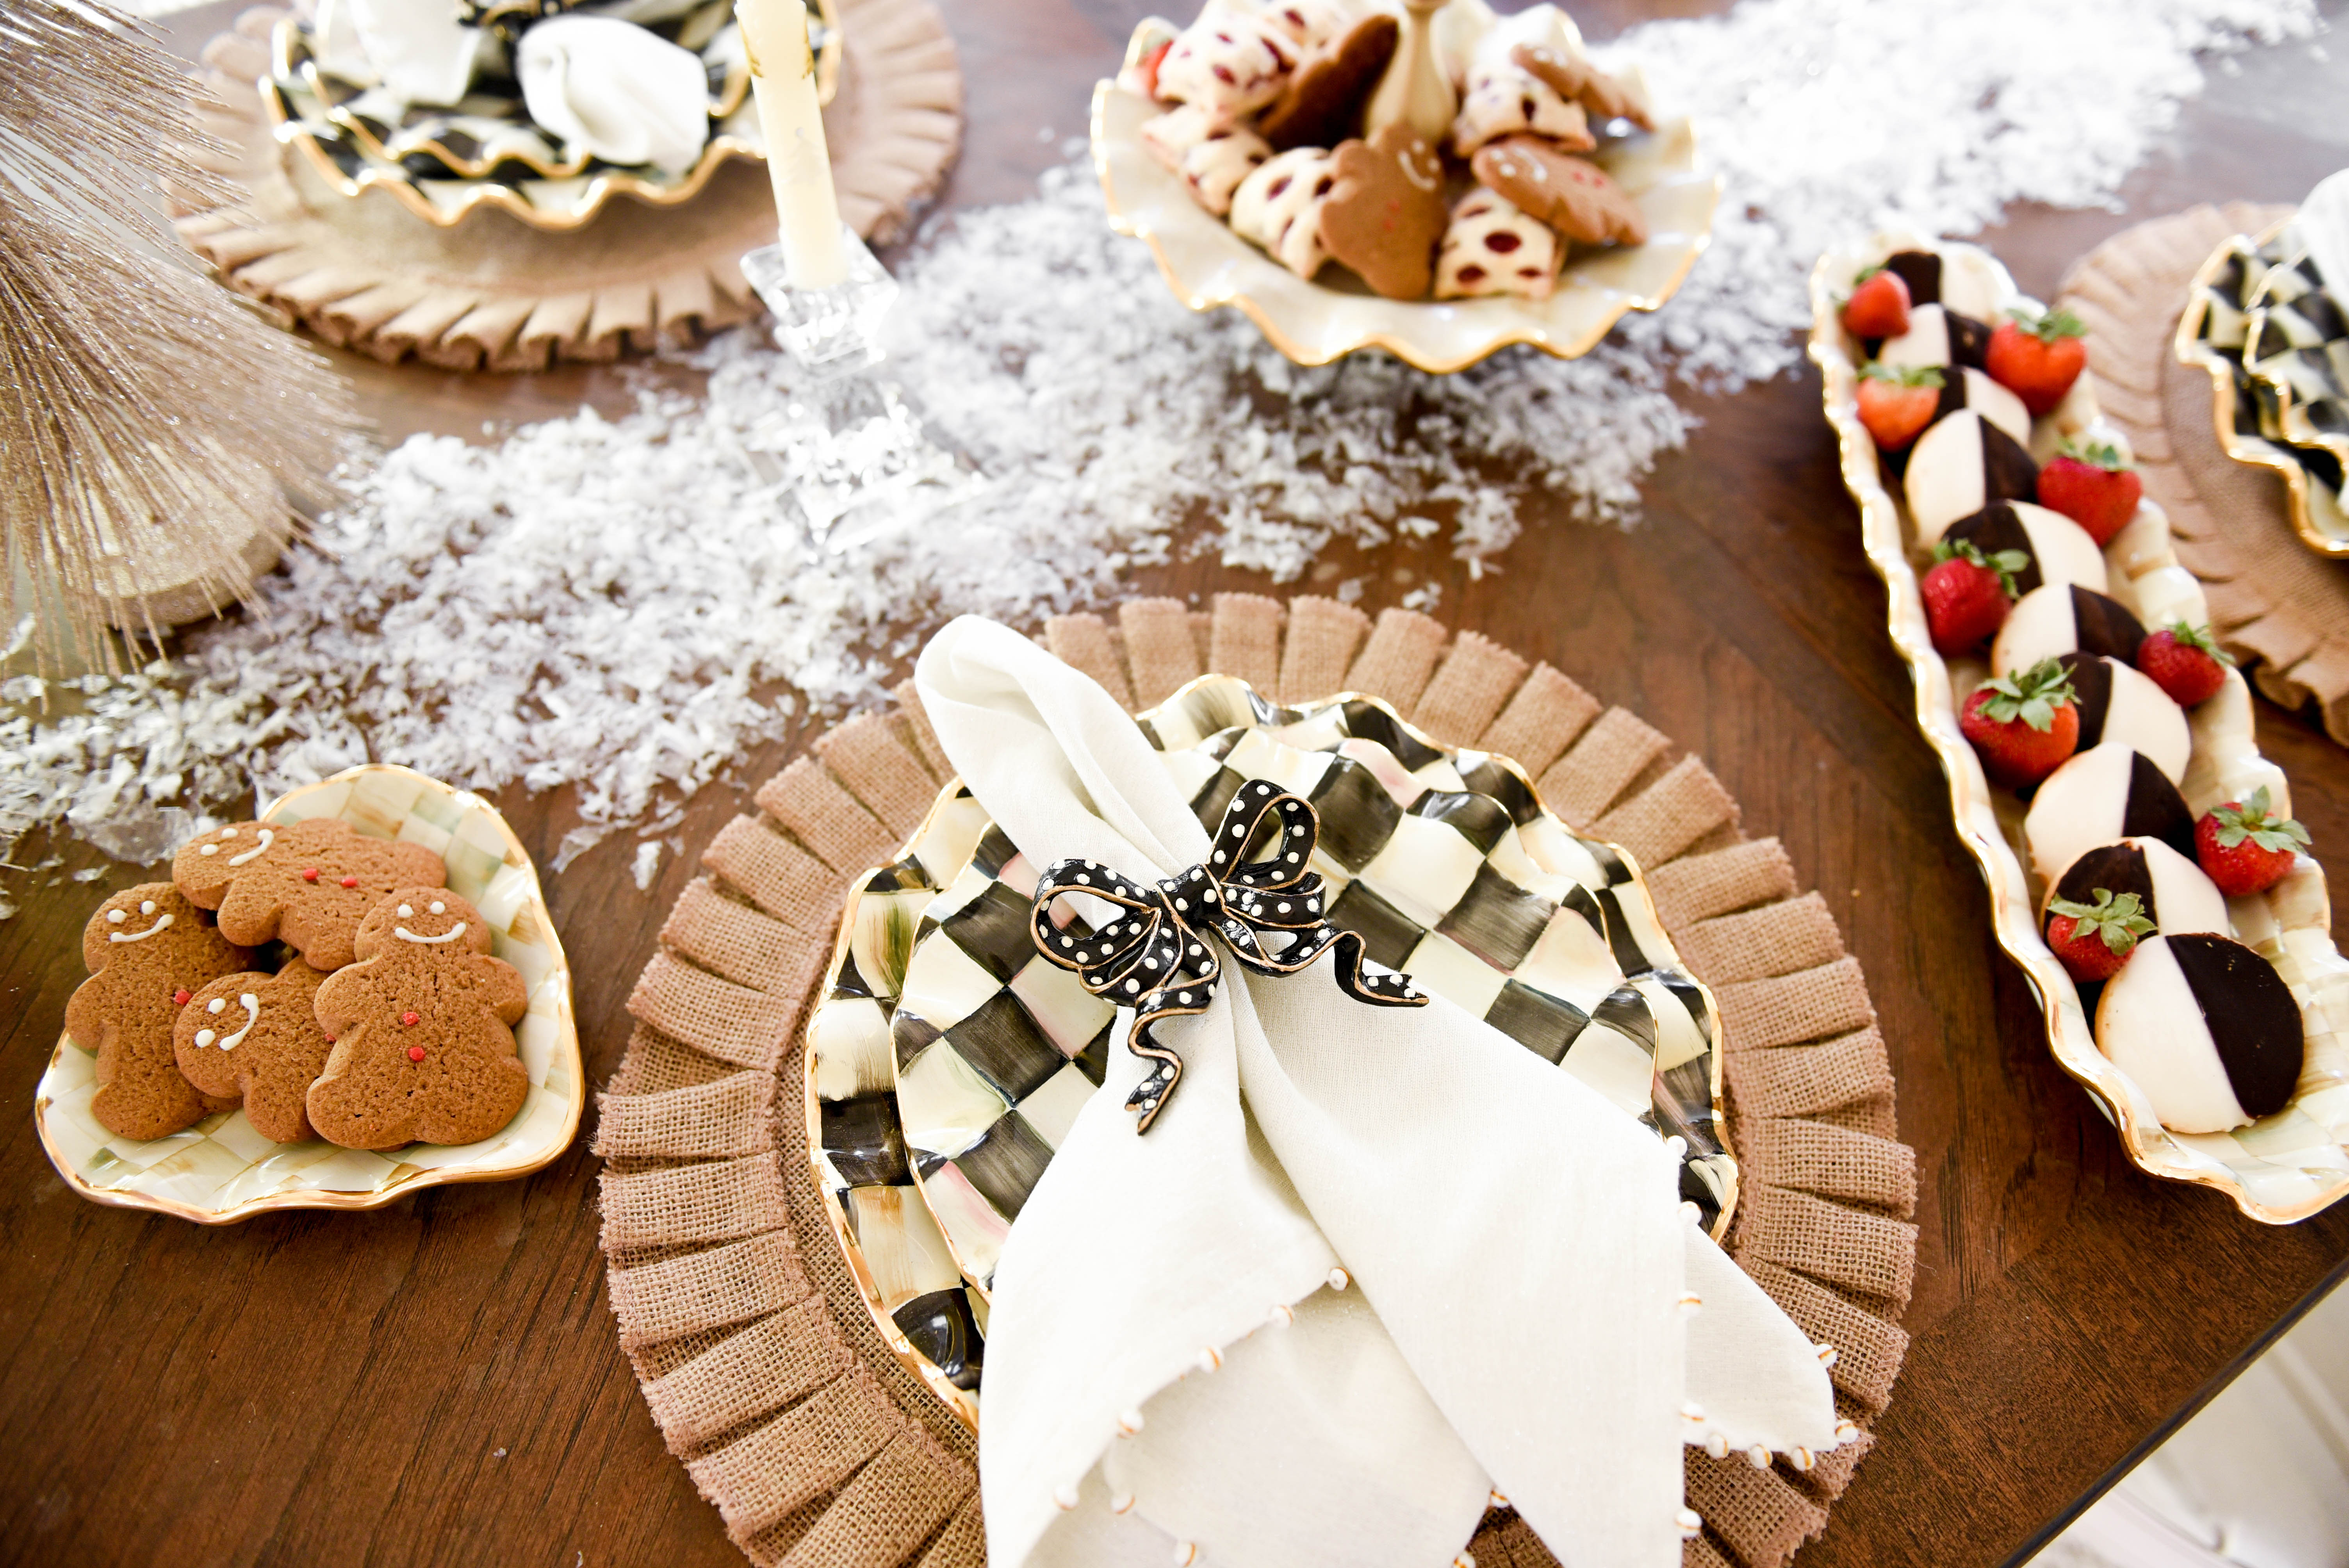 Lo-Murphy-Mackenzie-Childs-Holiday-Tablescape-Home-Decor-dessert-tray-courtley-check-holiday-dining-table-christmas-decor